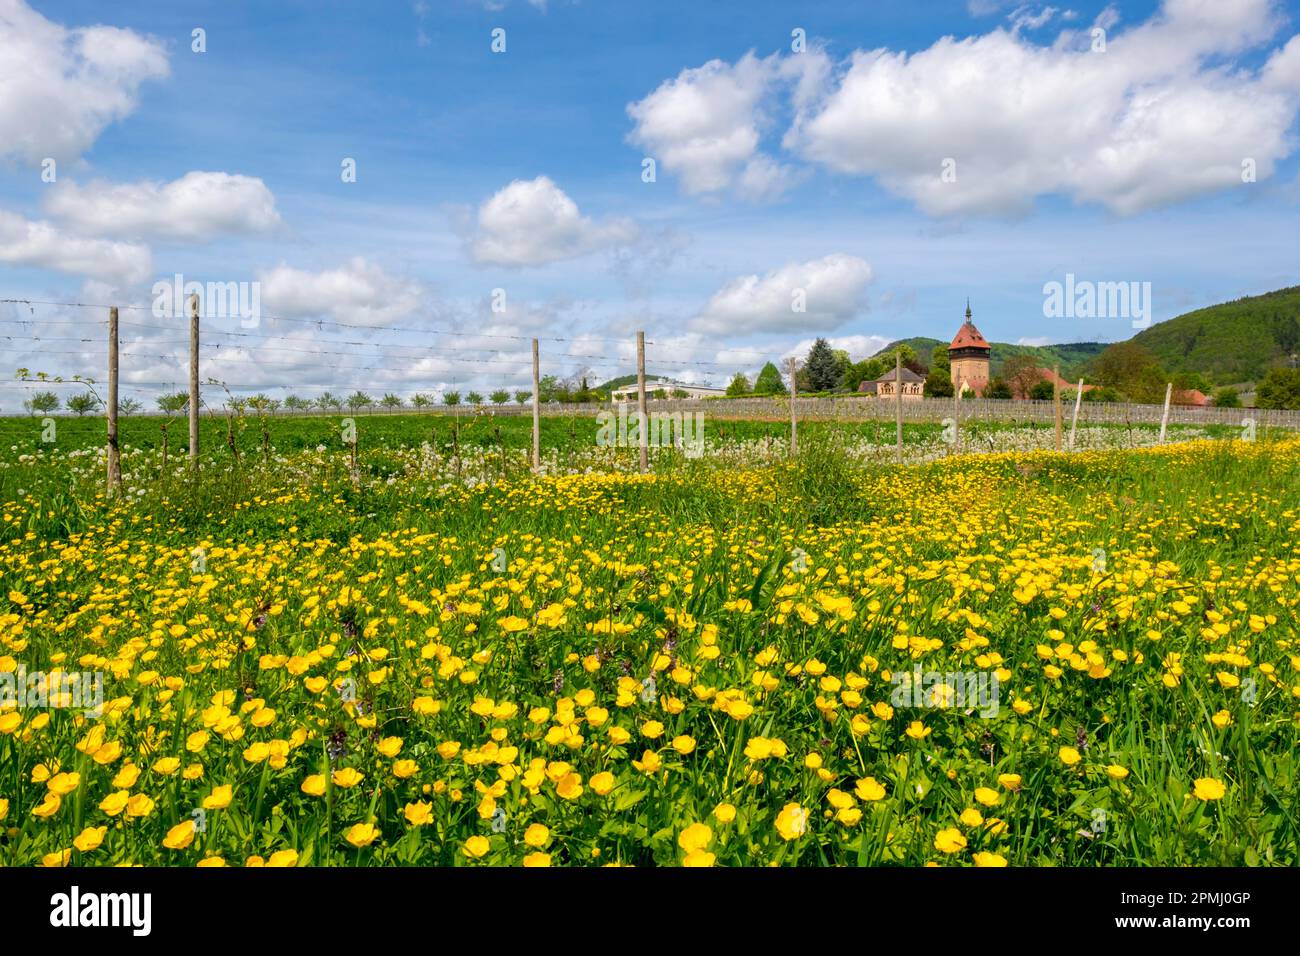 Tall buttercup (Ranunculus acris) syn. buttercup in meadow, Geilweilerhof, German Wine Route or also Southern Wine Route, Siebeldingen, Southern Stock Photo